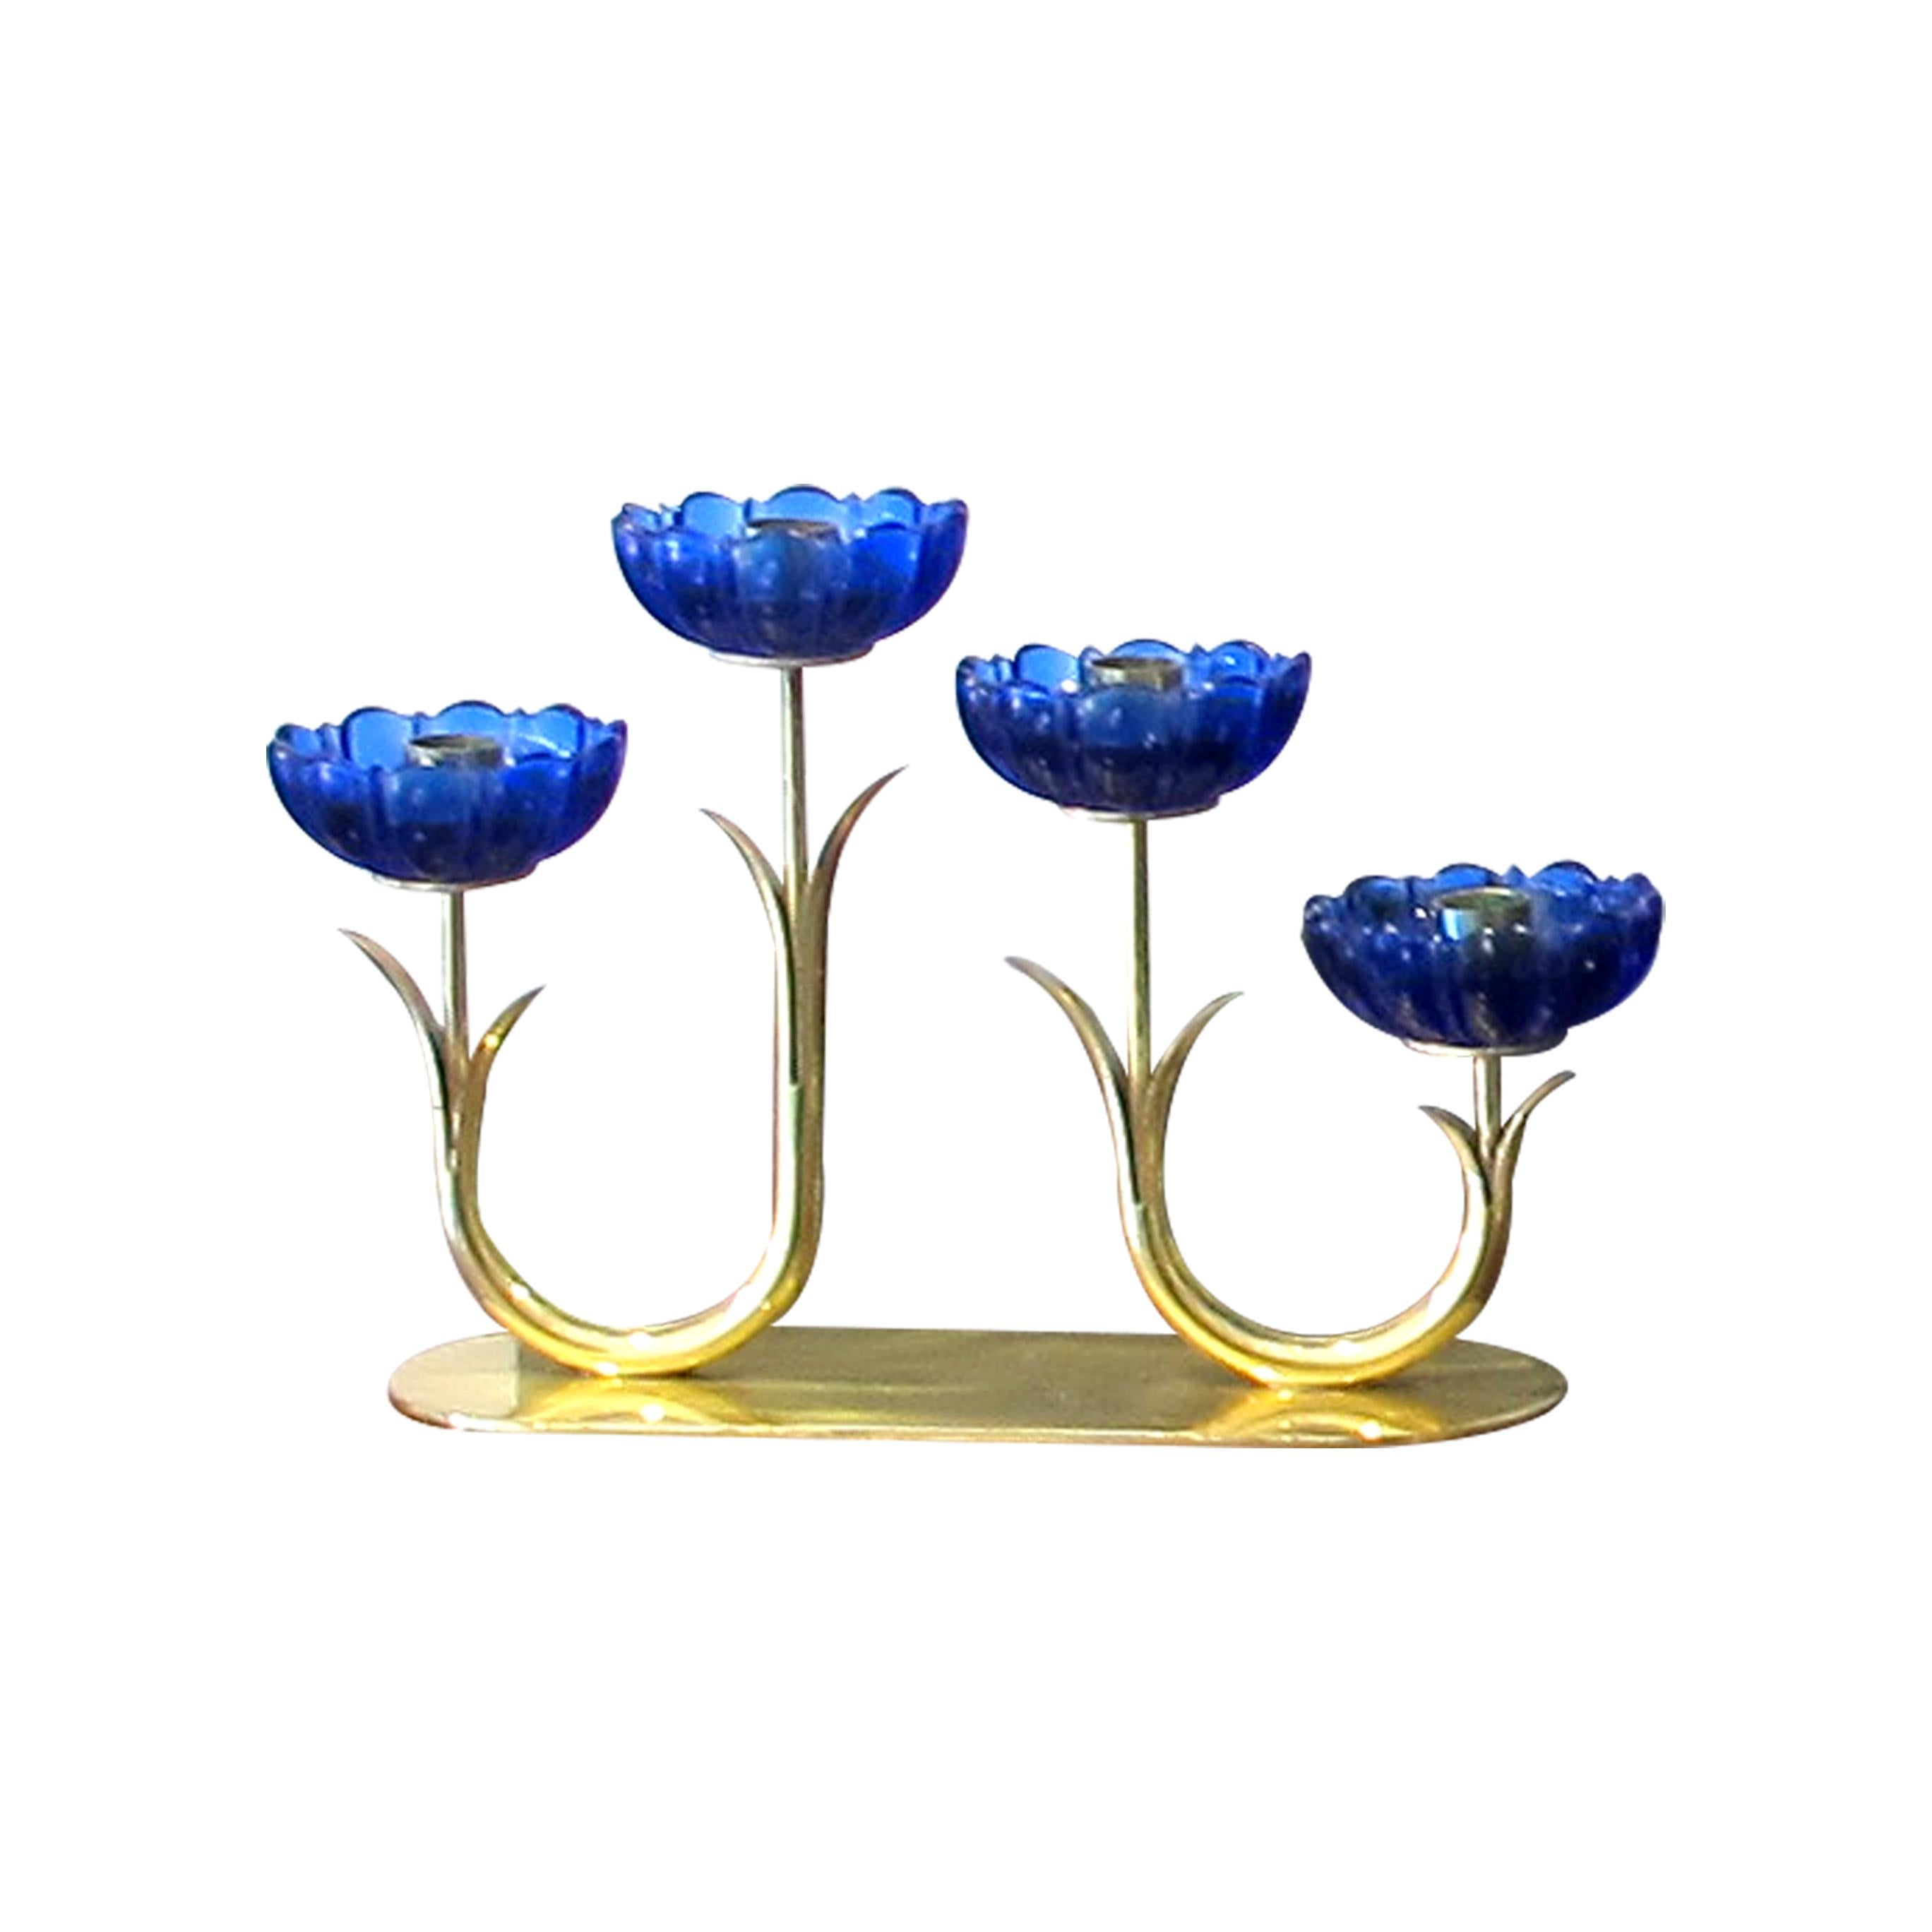 Mid-Century Modern Set of 8 1950s Swedish Candleholders designed by Gunnar Ander for Ystad Metall